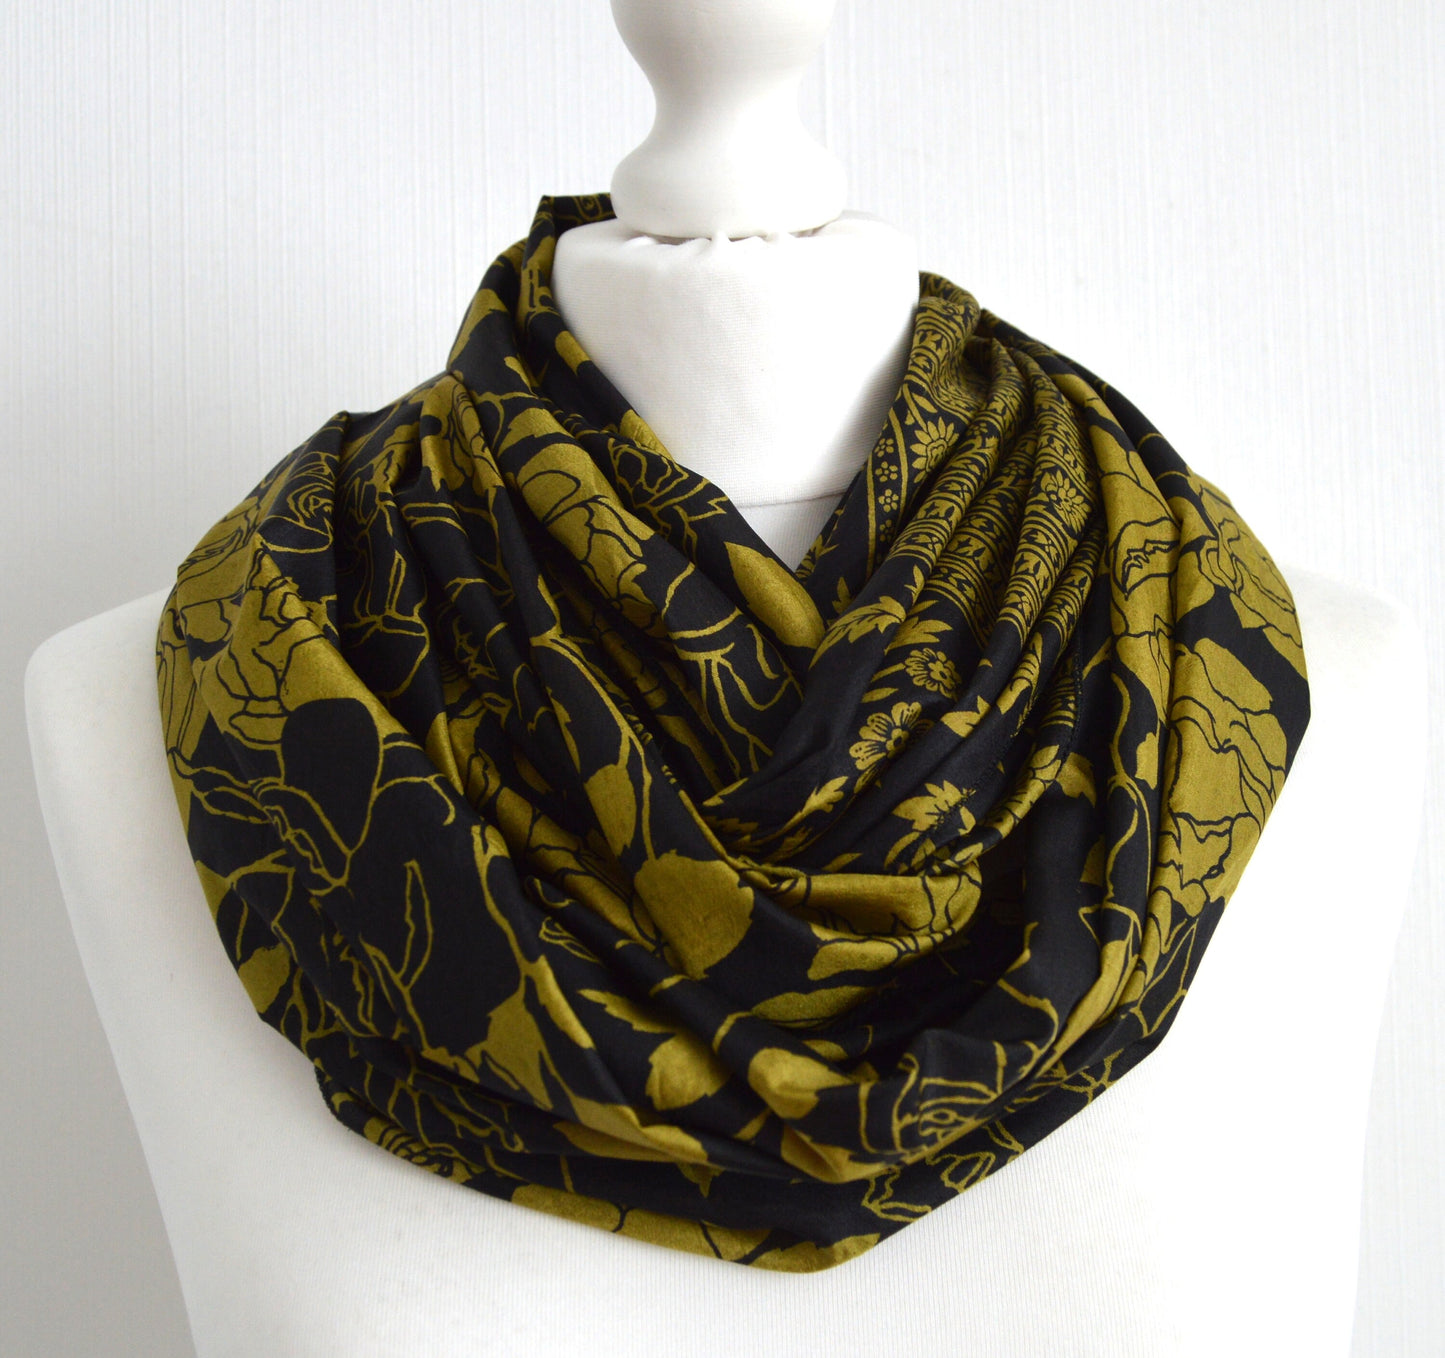 Black Chartreuse Floral Upcycled Vintage Sari Faux Silk Scarf - Handmade Nursing Cover Baby Shower Gift - Ethical Zero Waste Fashion